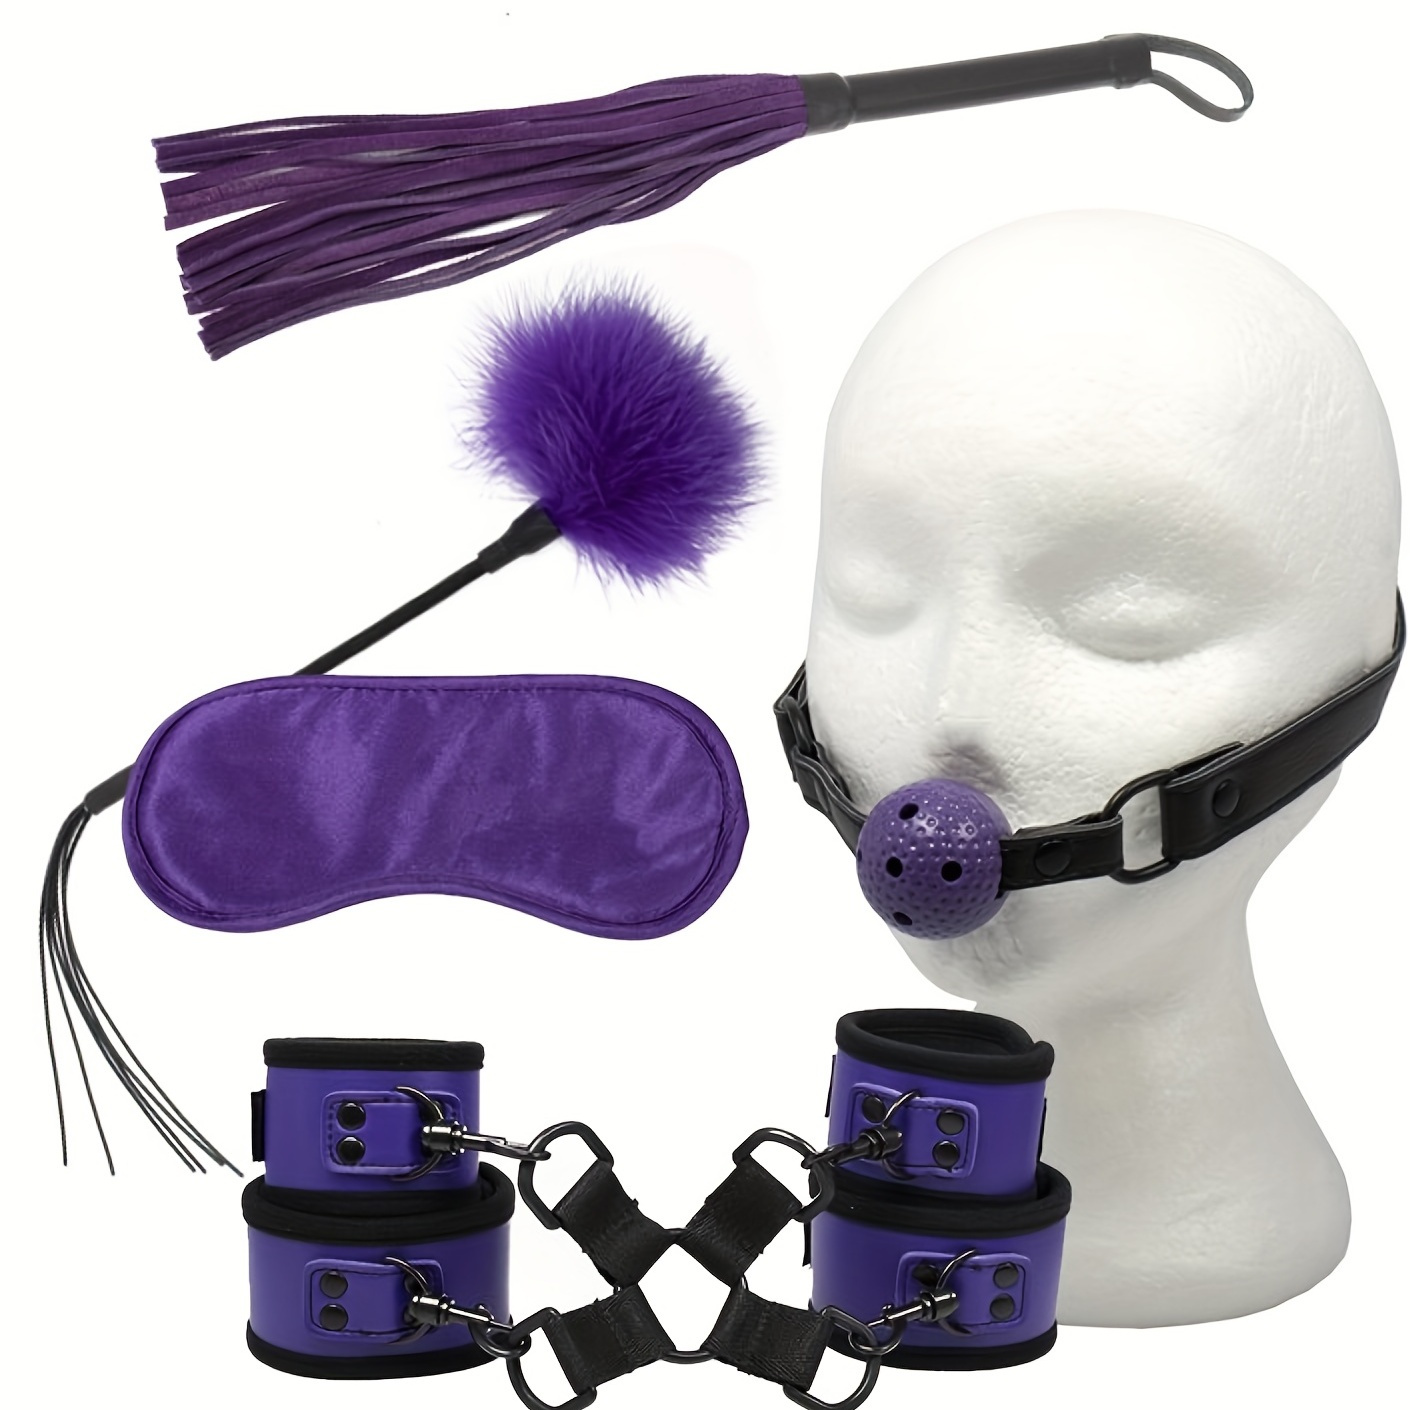 1 Set, Leather Penis Strap And Ball Stretcher Harness, Scrotum Sack  Bondage, Chastity Cock Cage,BDSM Sex Toys